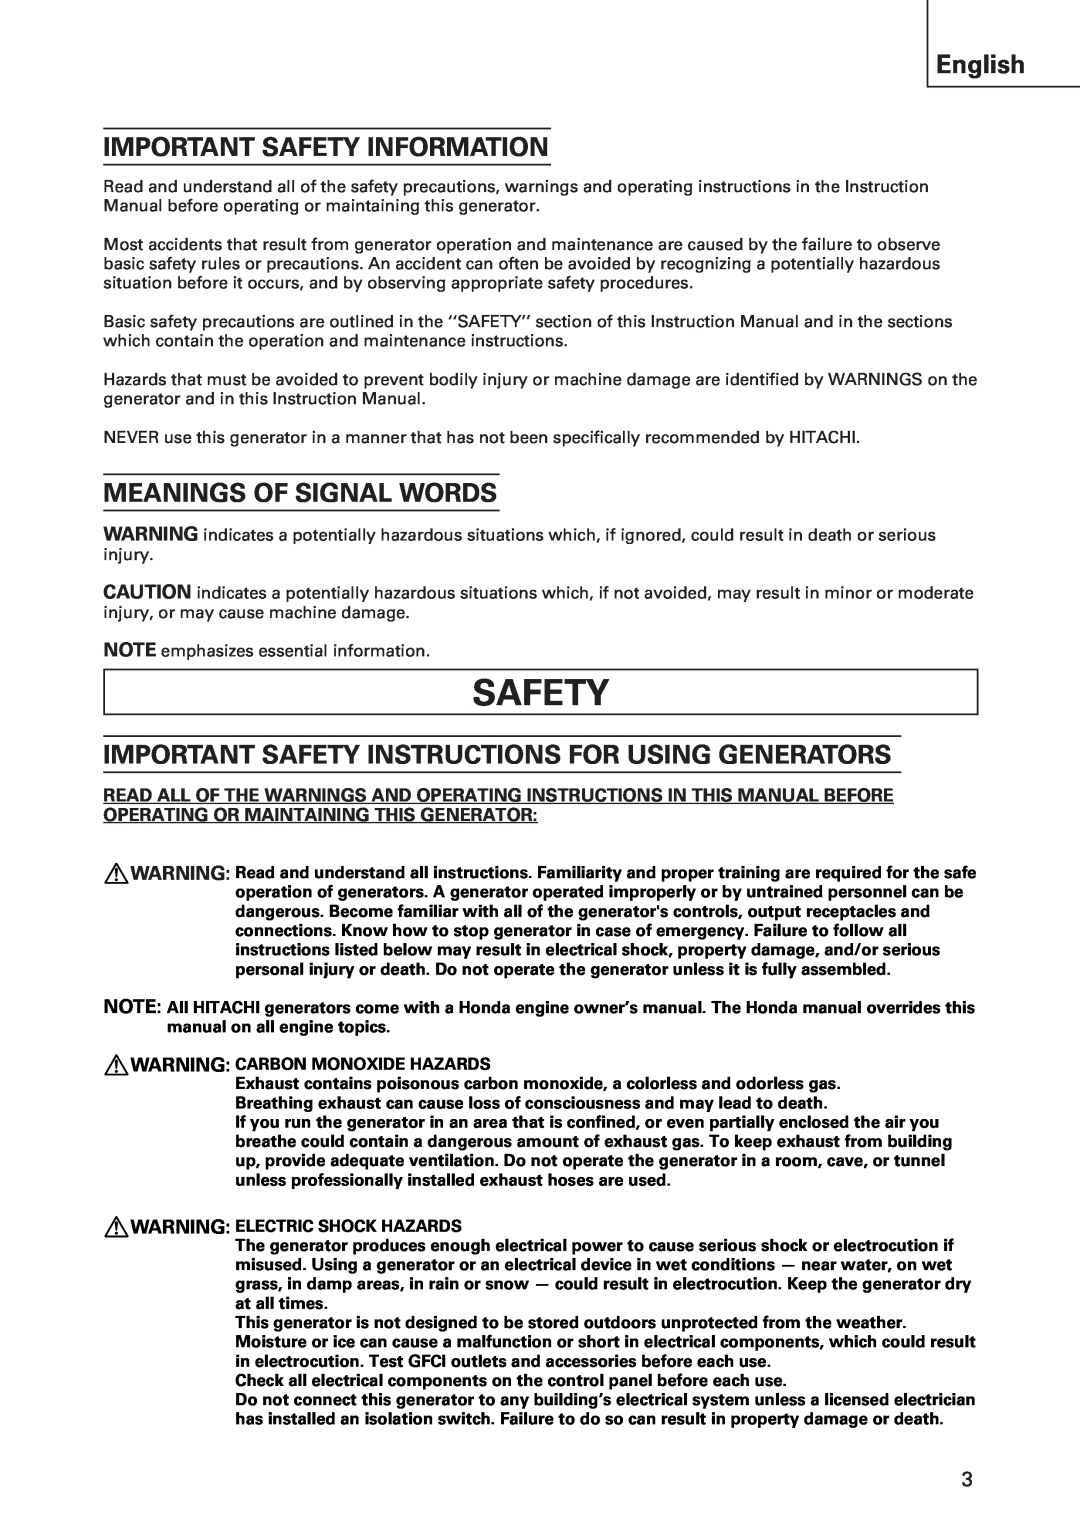 Hitachi E43 instruction manual Safety, English IMPORTANT SAFETY INFORMATION, Meanings Of Signal Words 